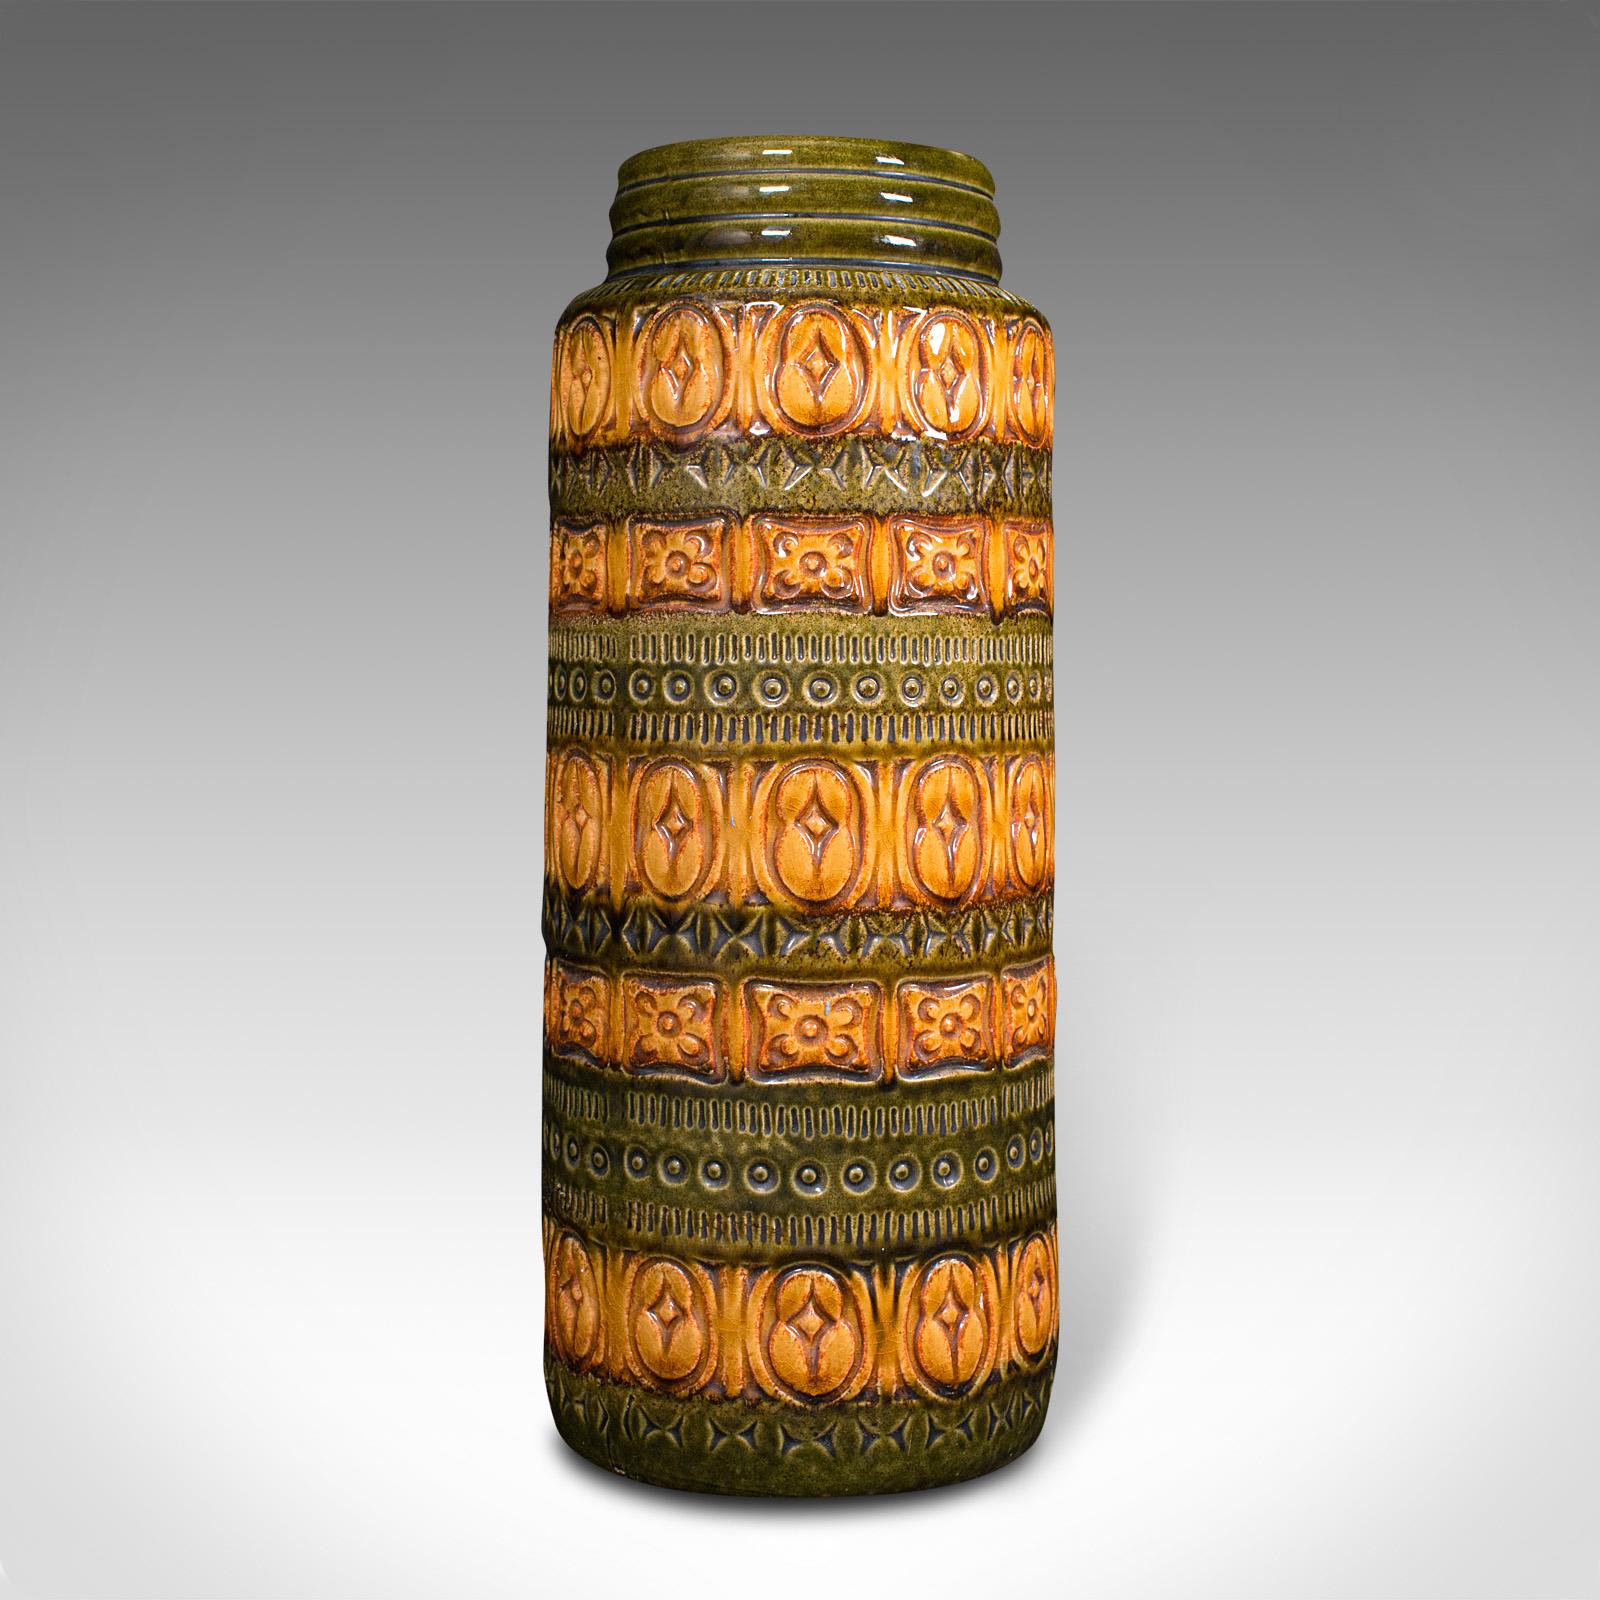 This is a vintage flower vase. A German, ceramic lava slip or decorative hall stick stand, dating to the mid 20th century, circa 1970.

Striking period colour and decoration
Displays a desirable aged patina throughout
Ceramic form decorated with